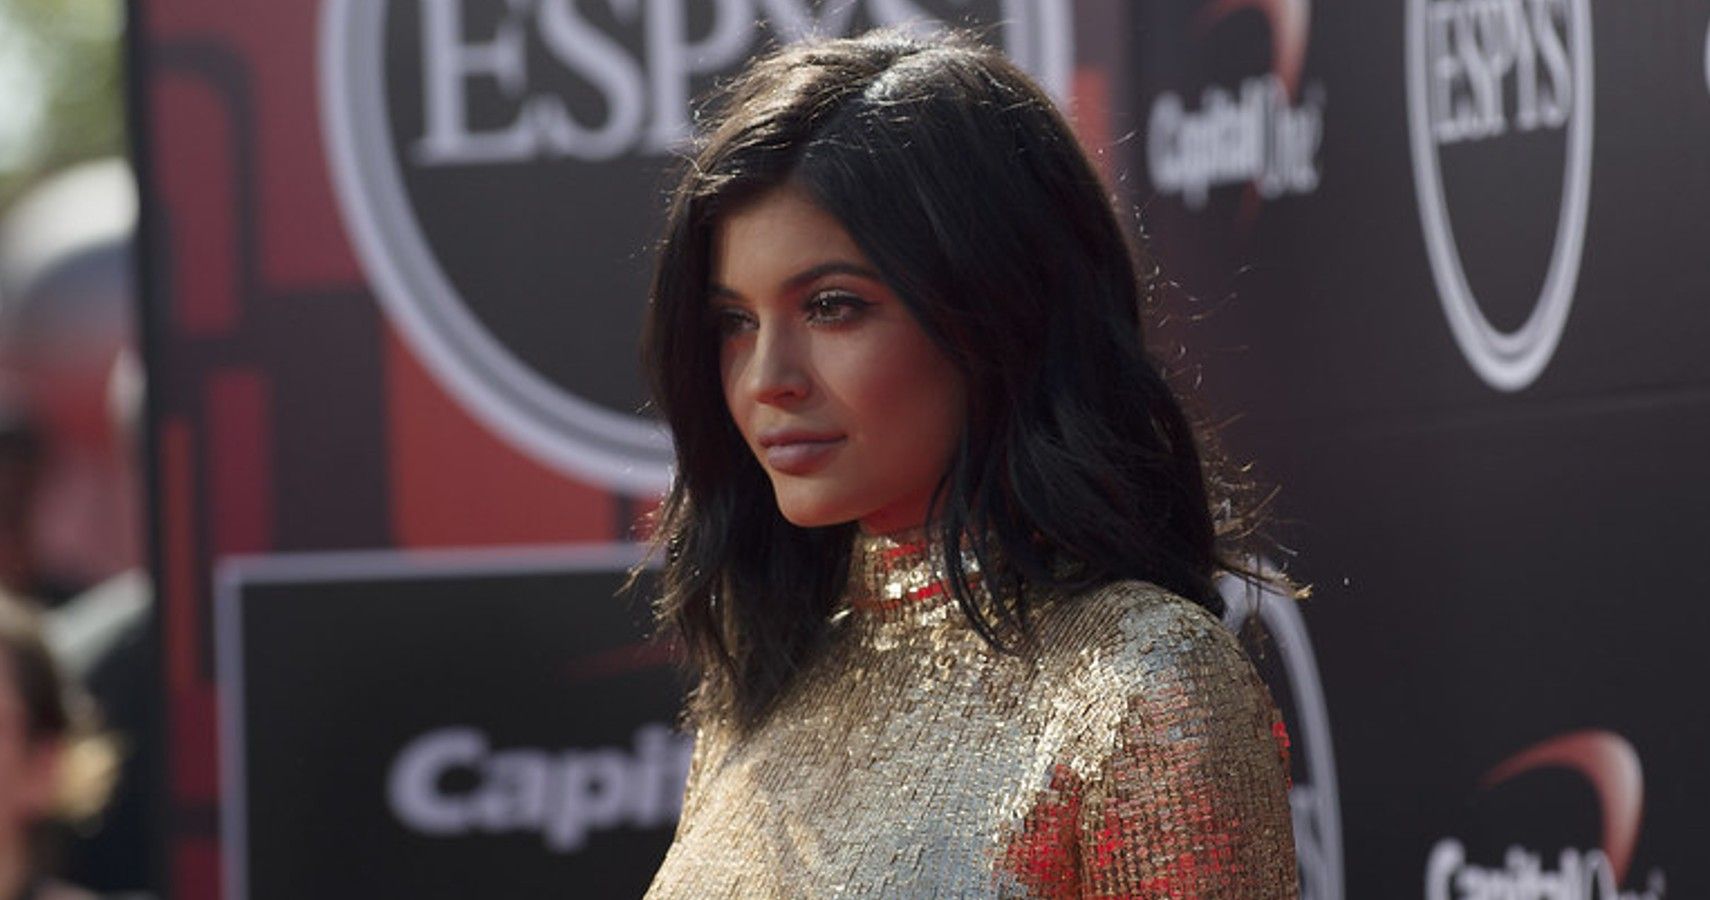 Kylie Jenner Reveals She Has _Pregnancy Brain_ While Expecting Baby No. 2